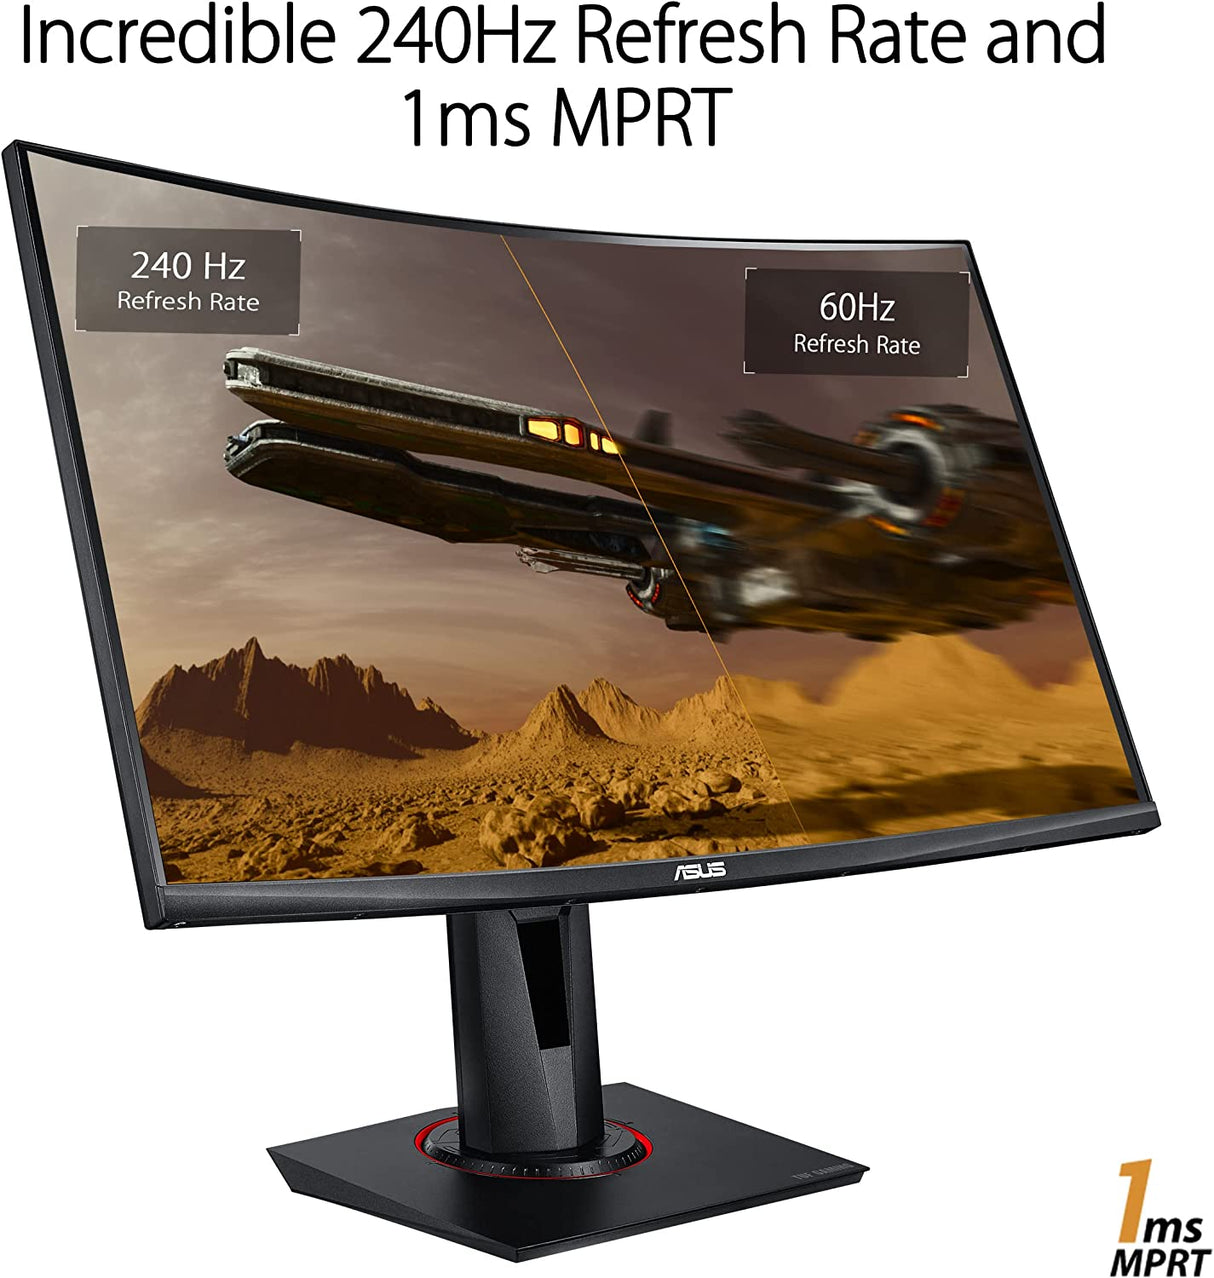 ASUS TUF Gaming VG27VH1B 27” Curved Monitor, 1080P Full HD, 165Hz (Supports  144Hz), Extreme Low Motion Blur, Adaptive-sync, FreeSync Premium, 1ms, Eye